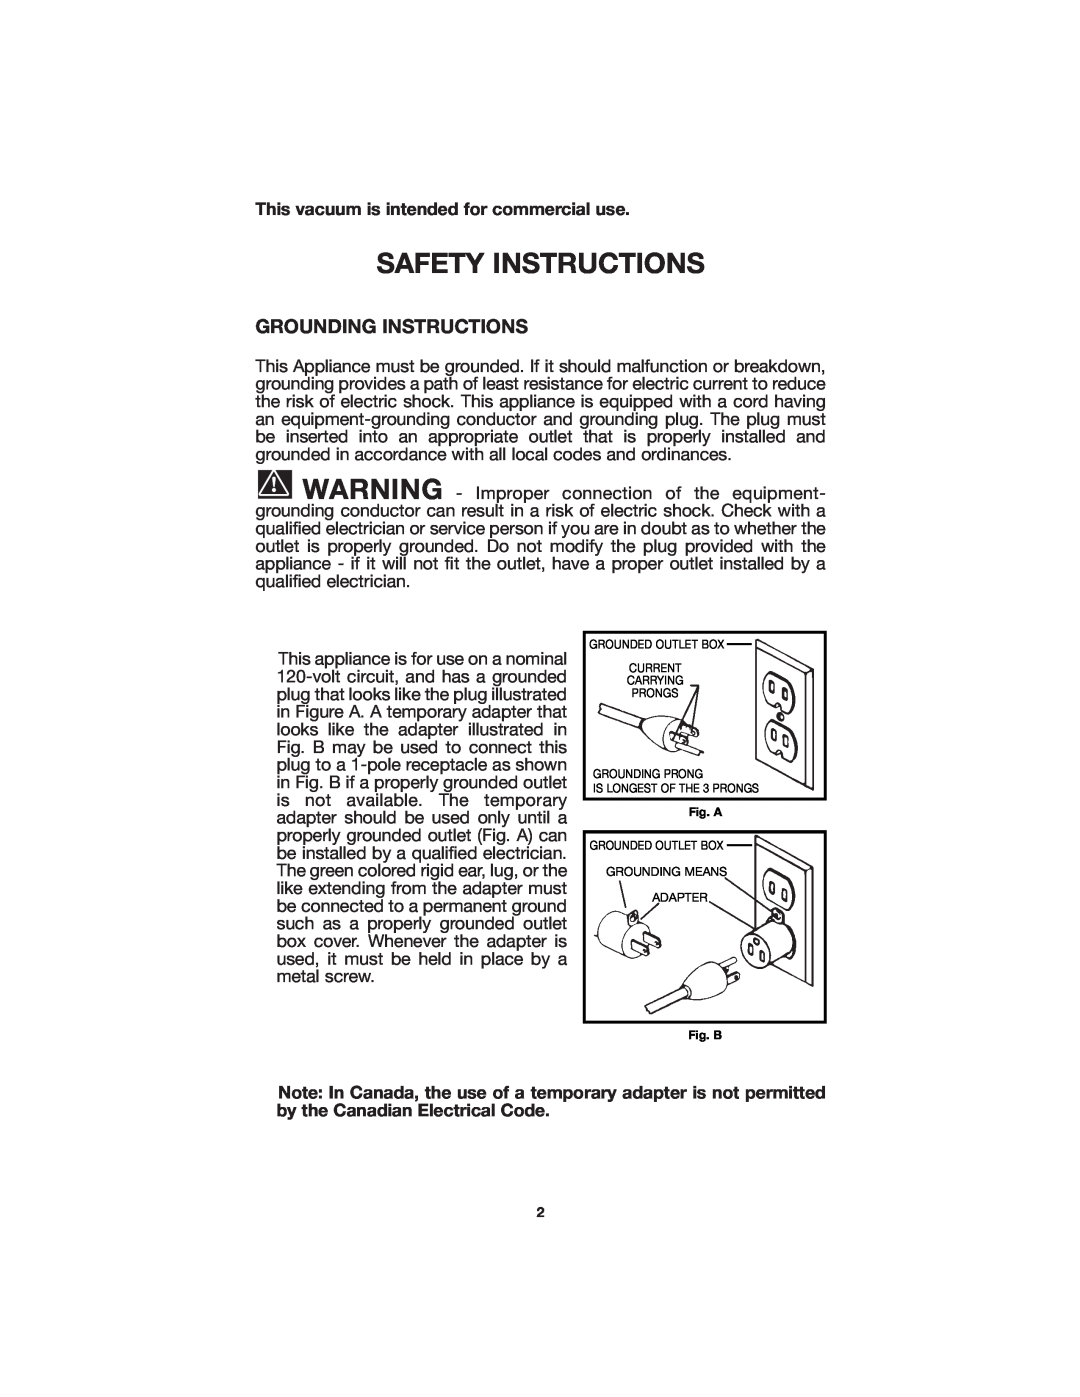 Porter-Cable 7812 Grounding Instructions, This vacuum is intended for commercial use, Safety Instructions 